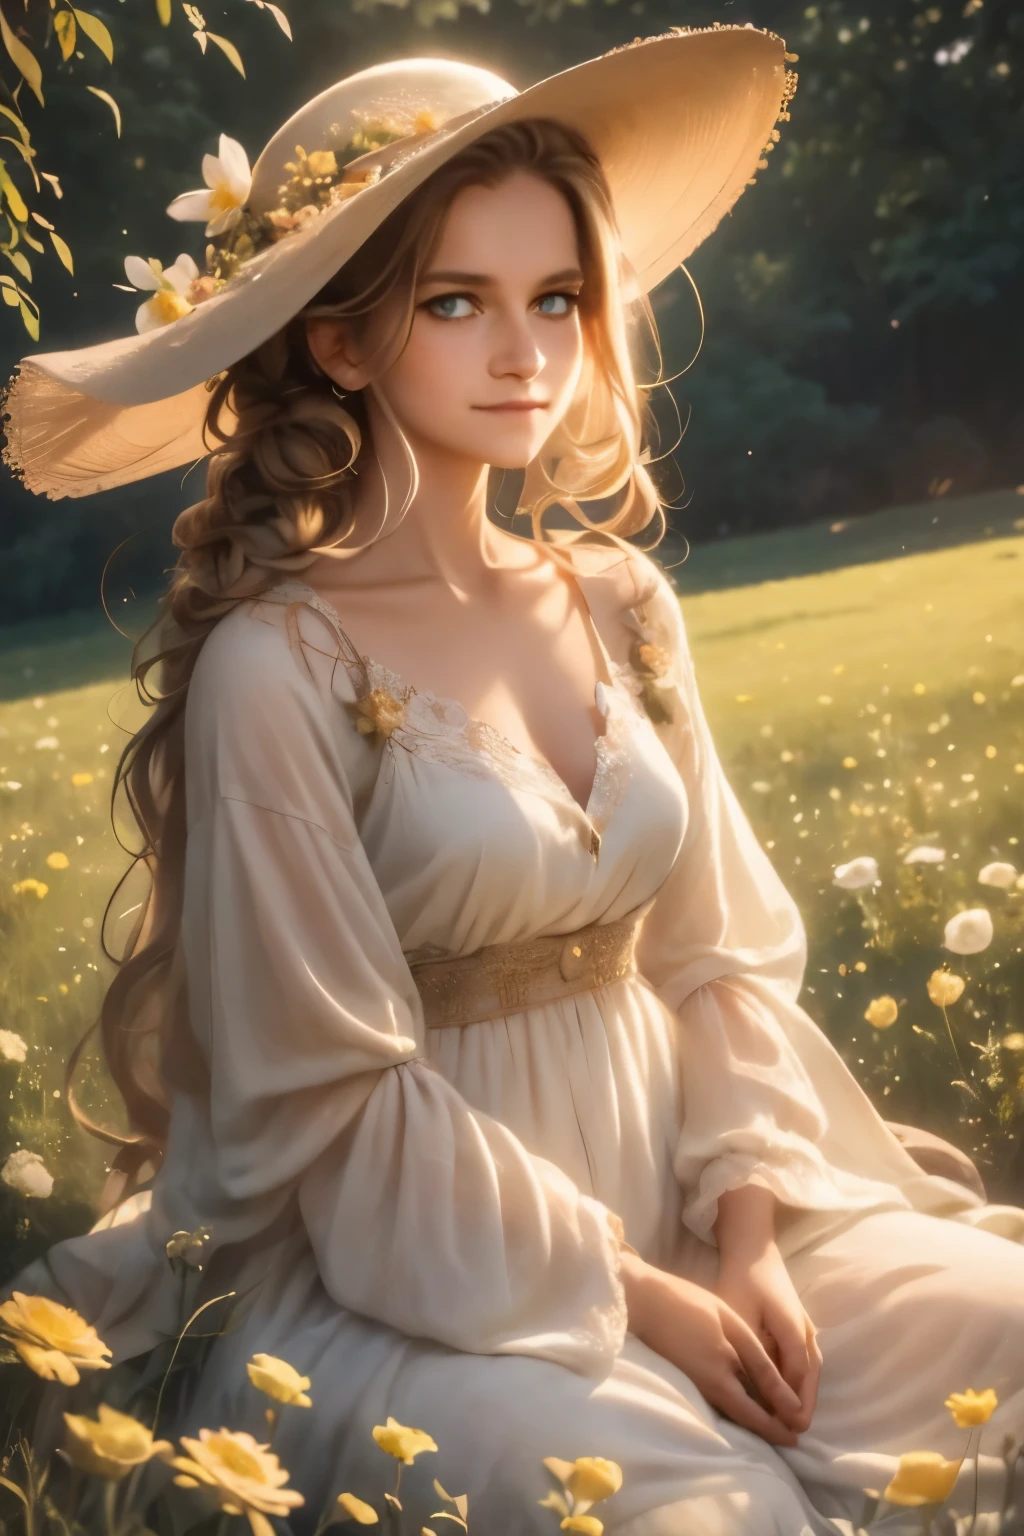 As the sun begins to set over a serene meadow, a serene meadow comes to life. In the center of the frame, a young buxom woman with freckles and very long curly blonde hair and a wide-brimmed hat gazes, tenderly into her surroundings. Her blue eyes bulge with a sense of contentment as she gazes towards the stars in the universe she occupies. The air is still, and the scent of fresh flowers fills the air, casting a soft golden glow on the landscape below. The words "innocent smile" are visible and hidden, a reminder of the boundless possibilities that can be found in the realm of imagination.
